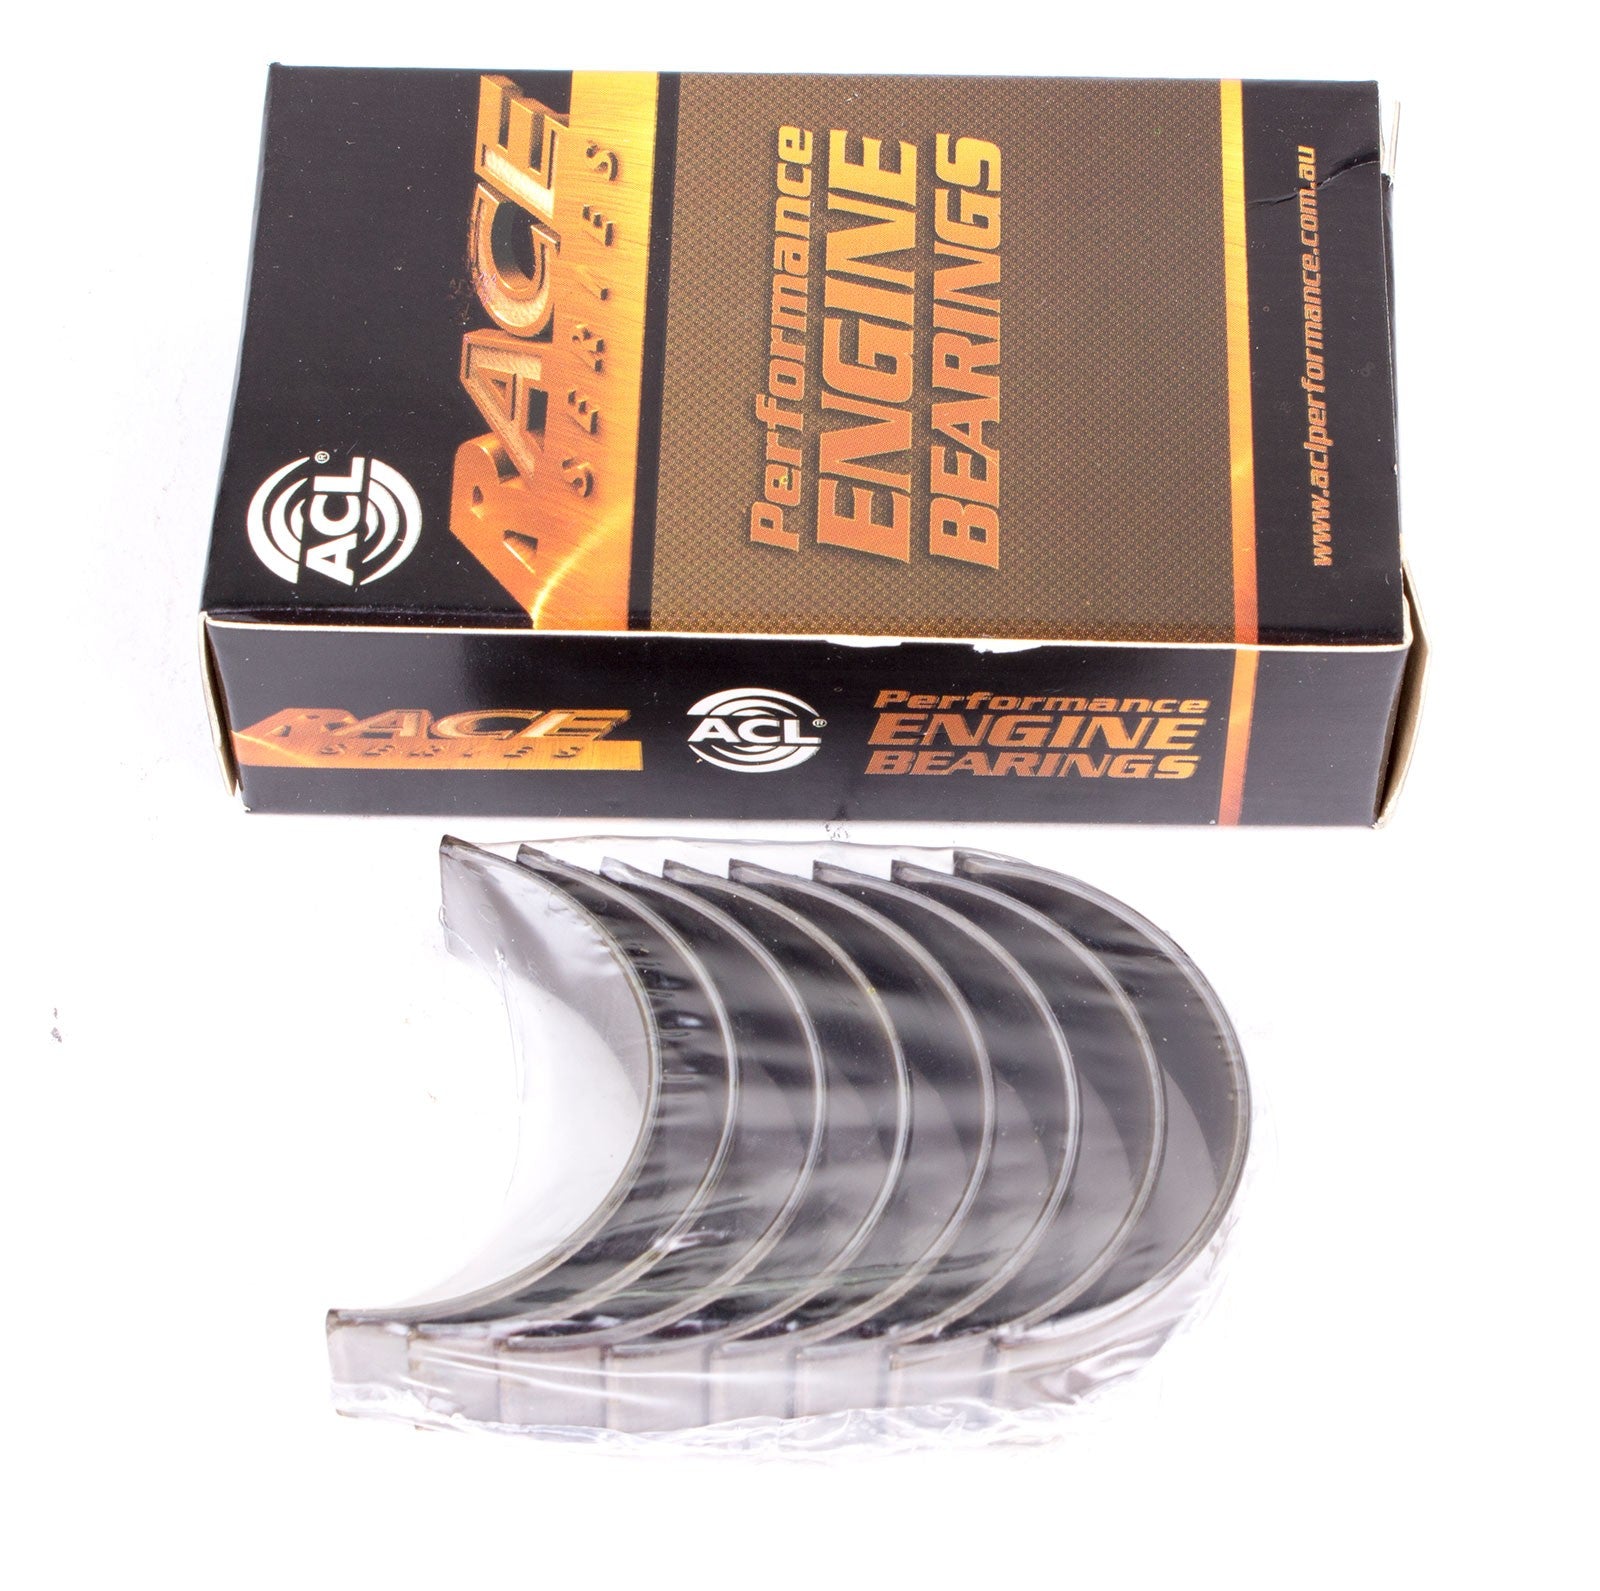 ACL 5M429H-10 Main bearing set (ACL Race Series) Photo-0 